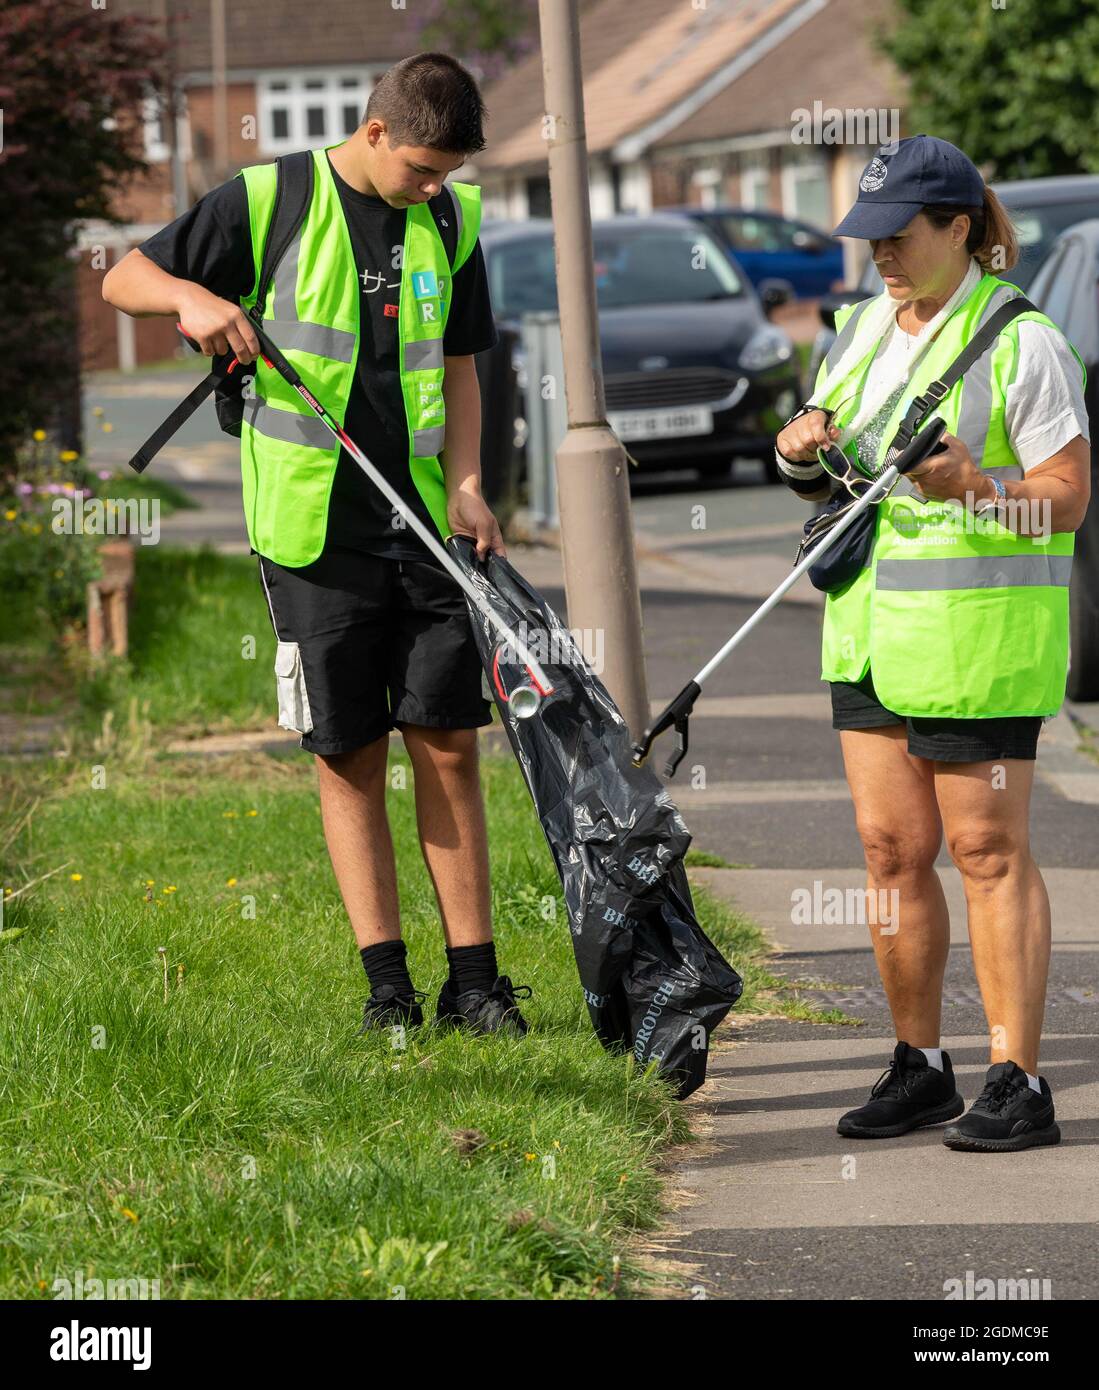 Brentwood, UK. 14th Aug, 2021. Hutton Essex 14th August 2021 The 'Keep Hutton and Shenfield tidy' group took part in a community litter pick day in Hutton Essex led by the local Councillor Keith Barber Credit: Ian Davidson/Alamy Live News Stock Photo